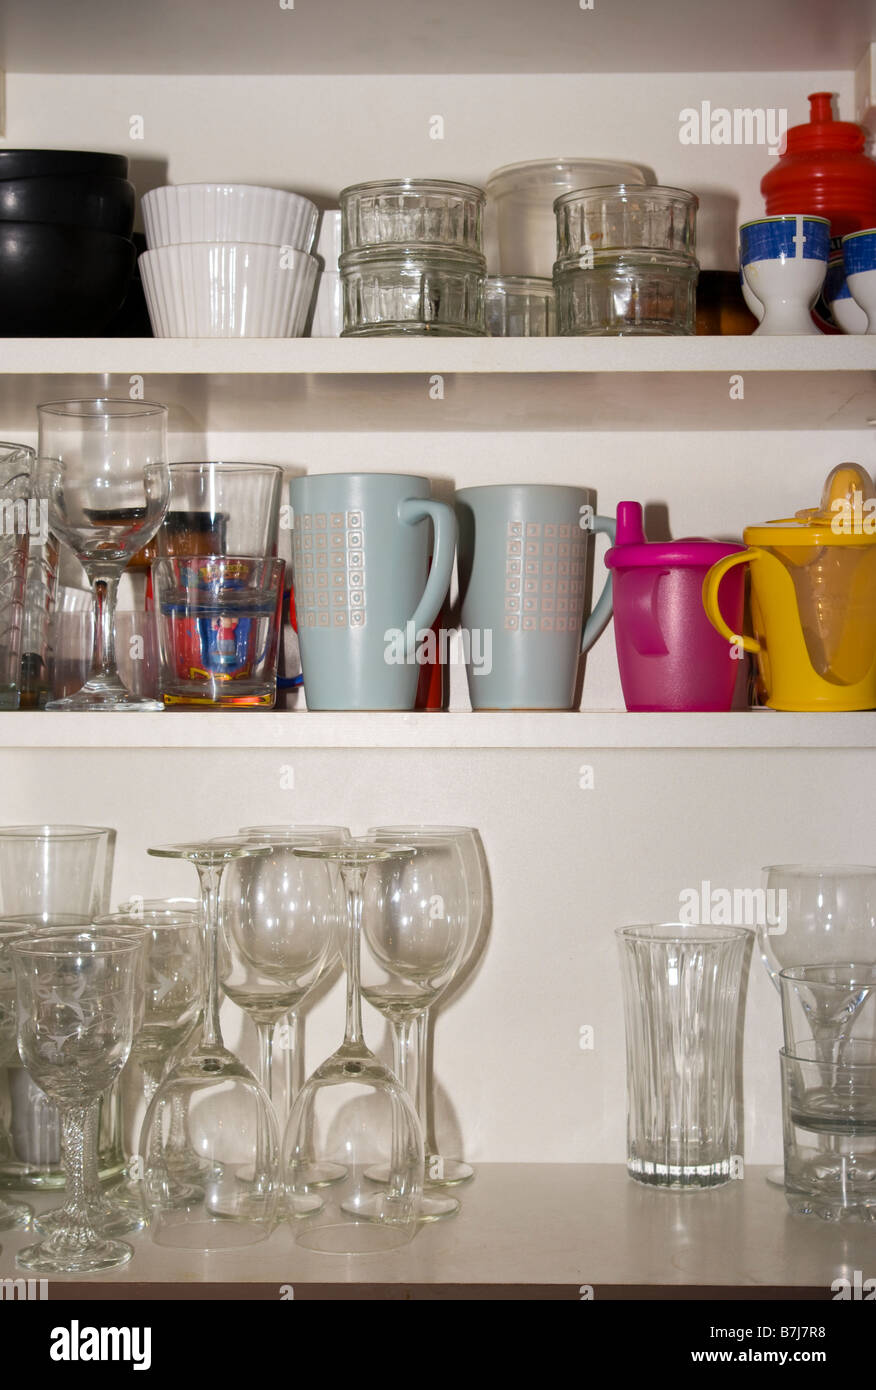 open Kitchen Cupboard Cupboards Containing Glasses and Crockery Stock Photo